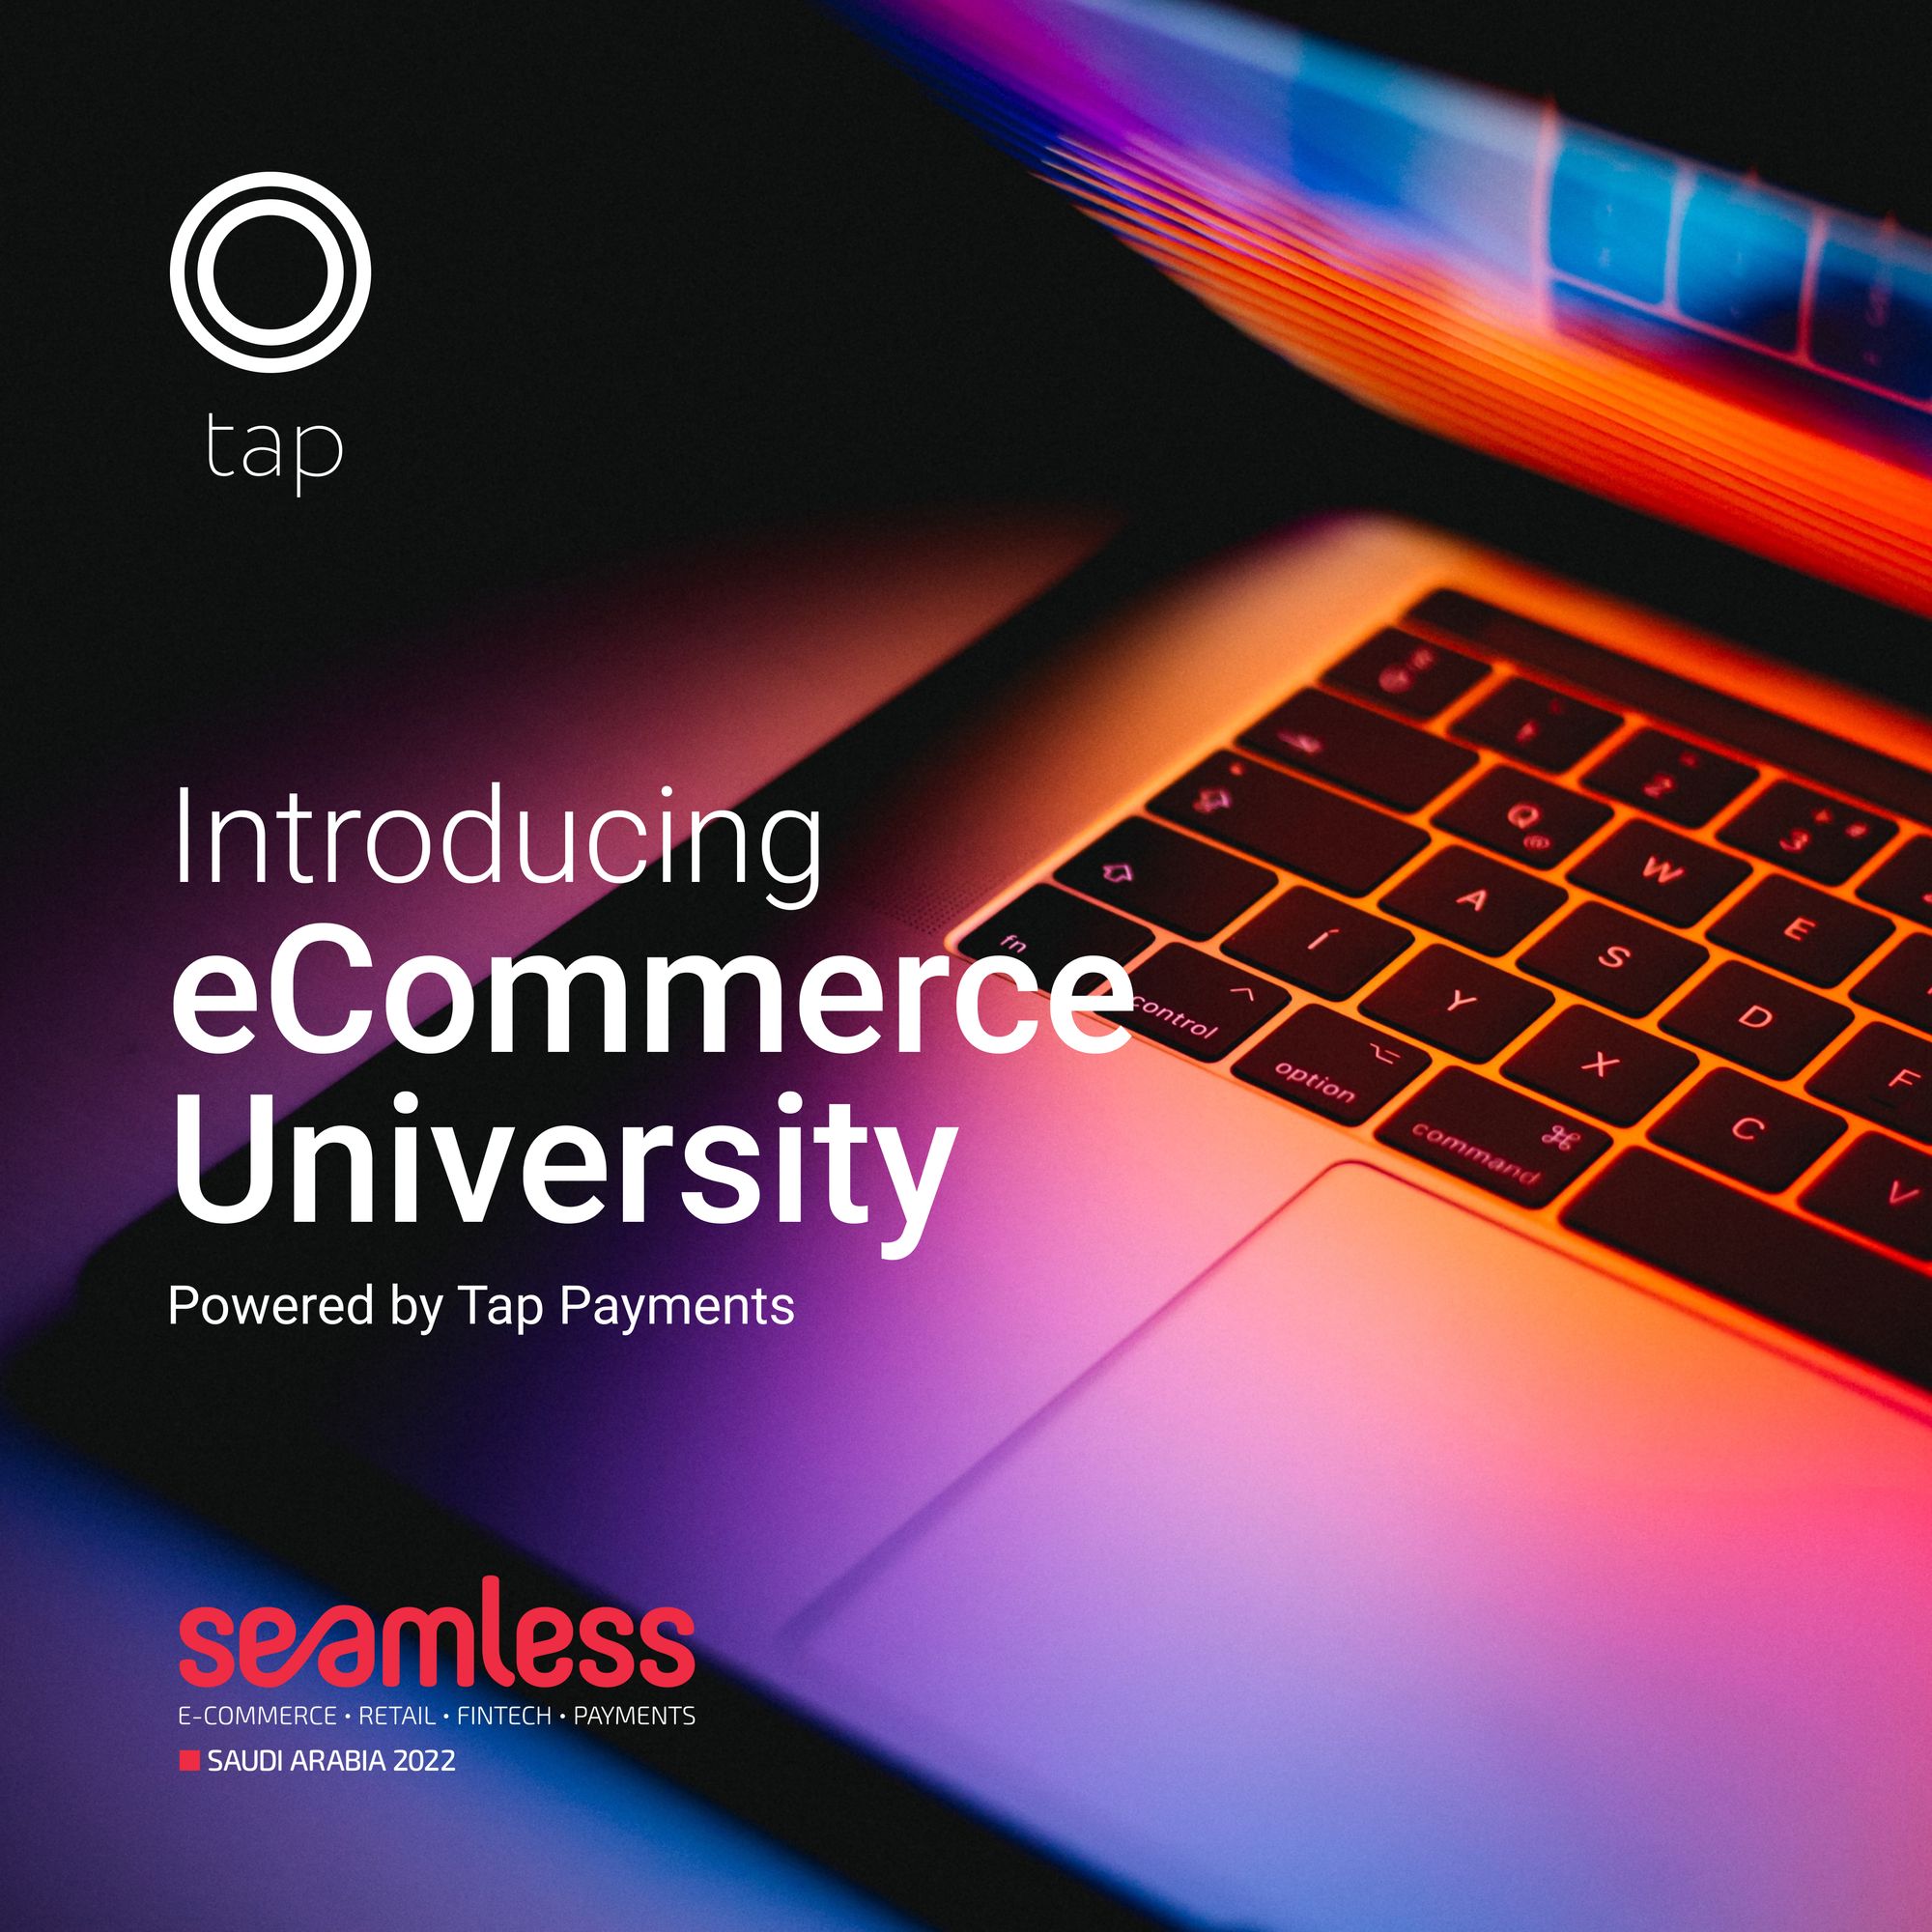 eCommerce University powered by Tap Payments